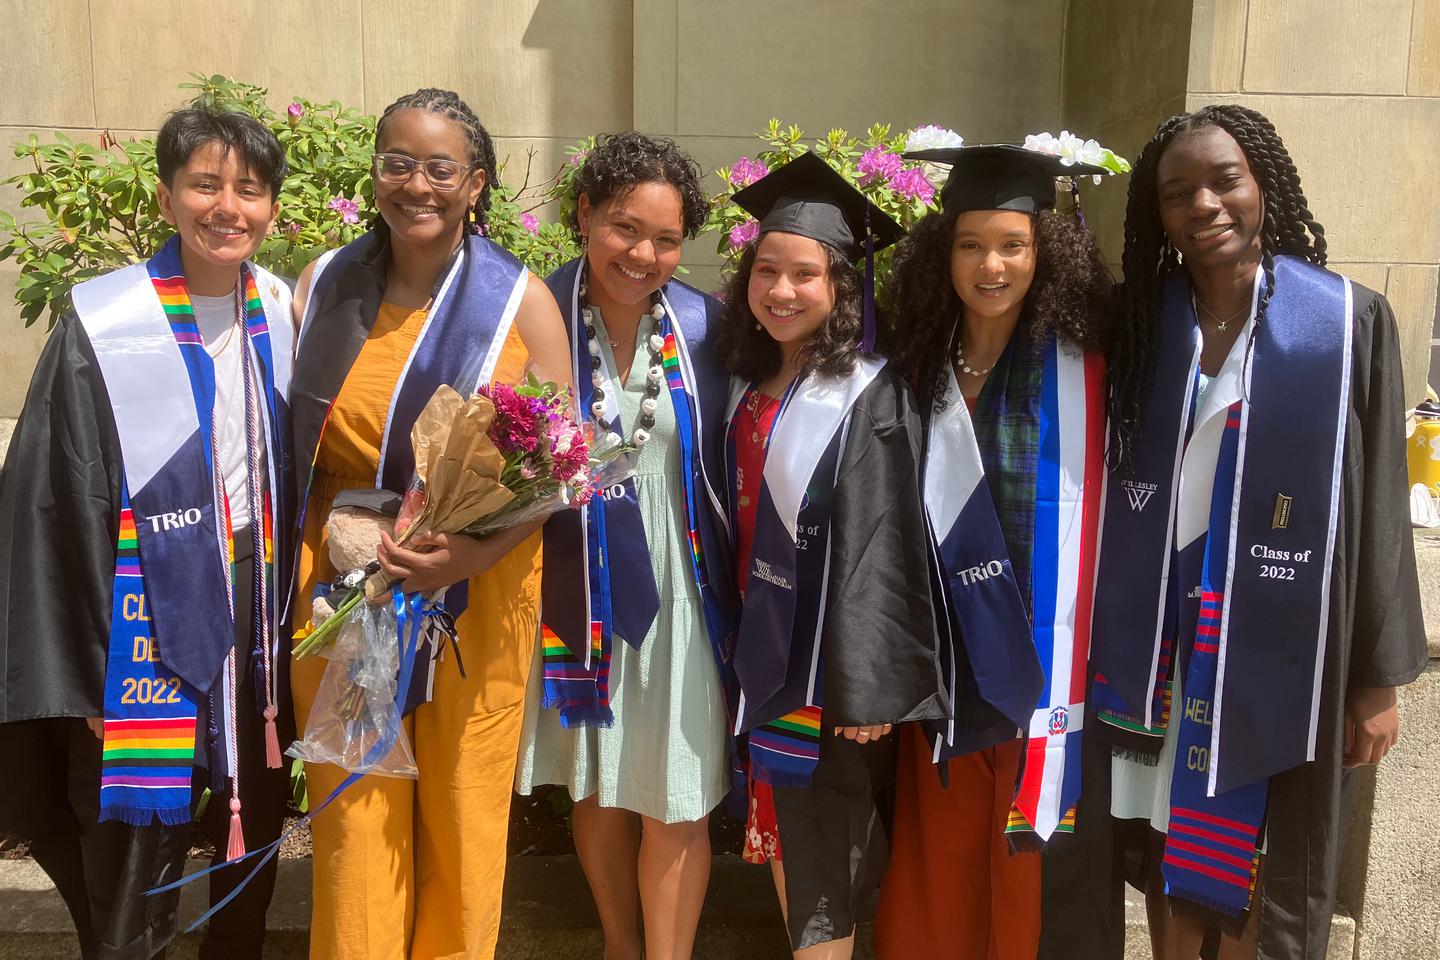 Six Wellesley 2022 graduates who were also McNair scholars pose together for a photograph.